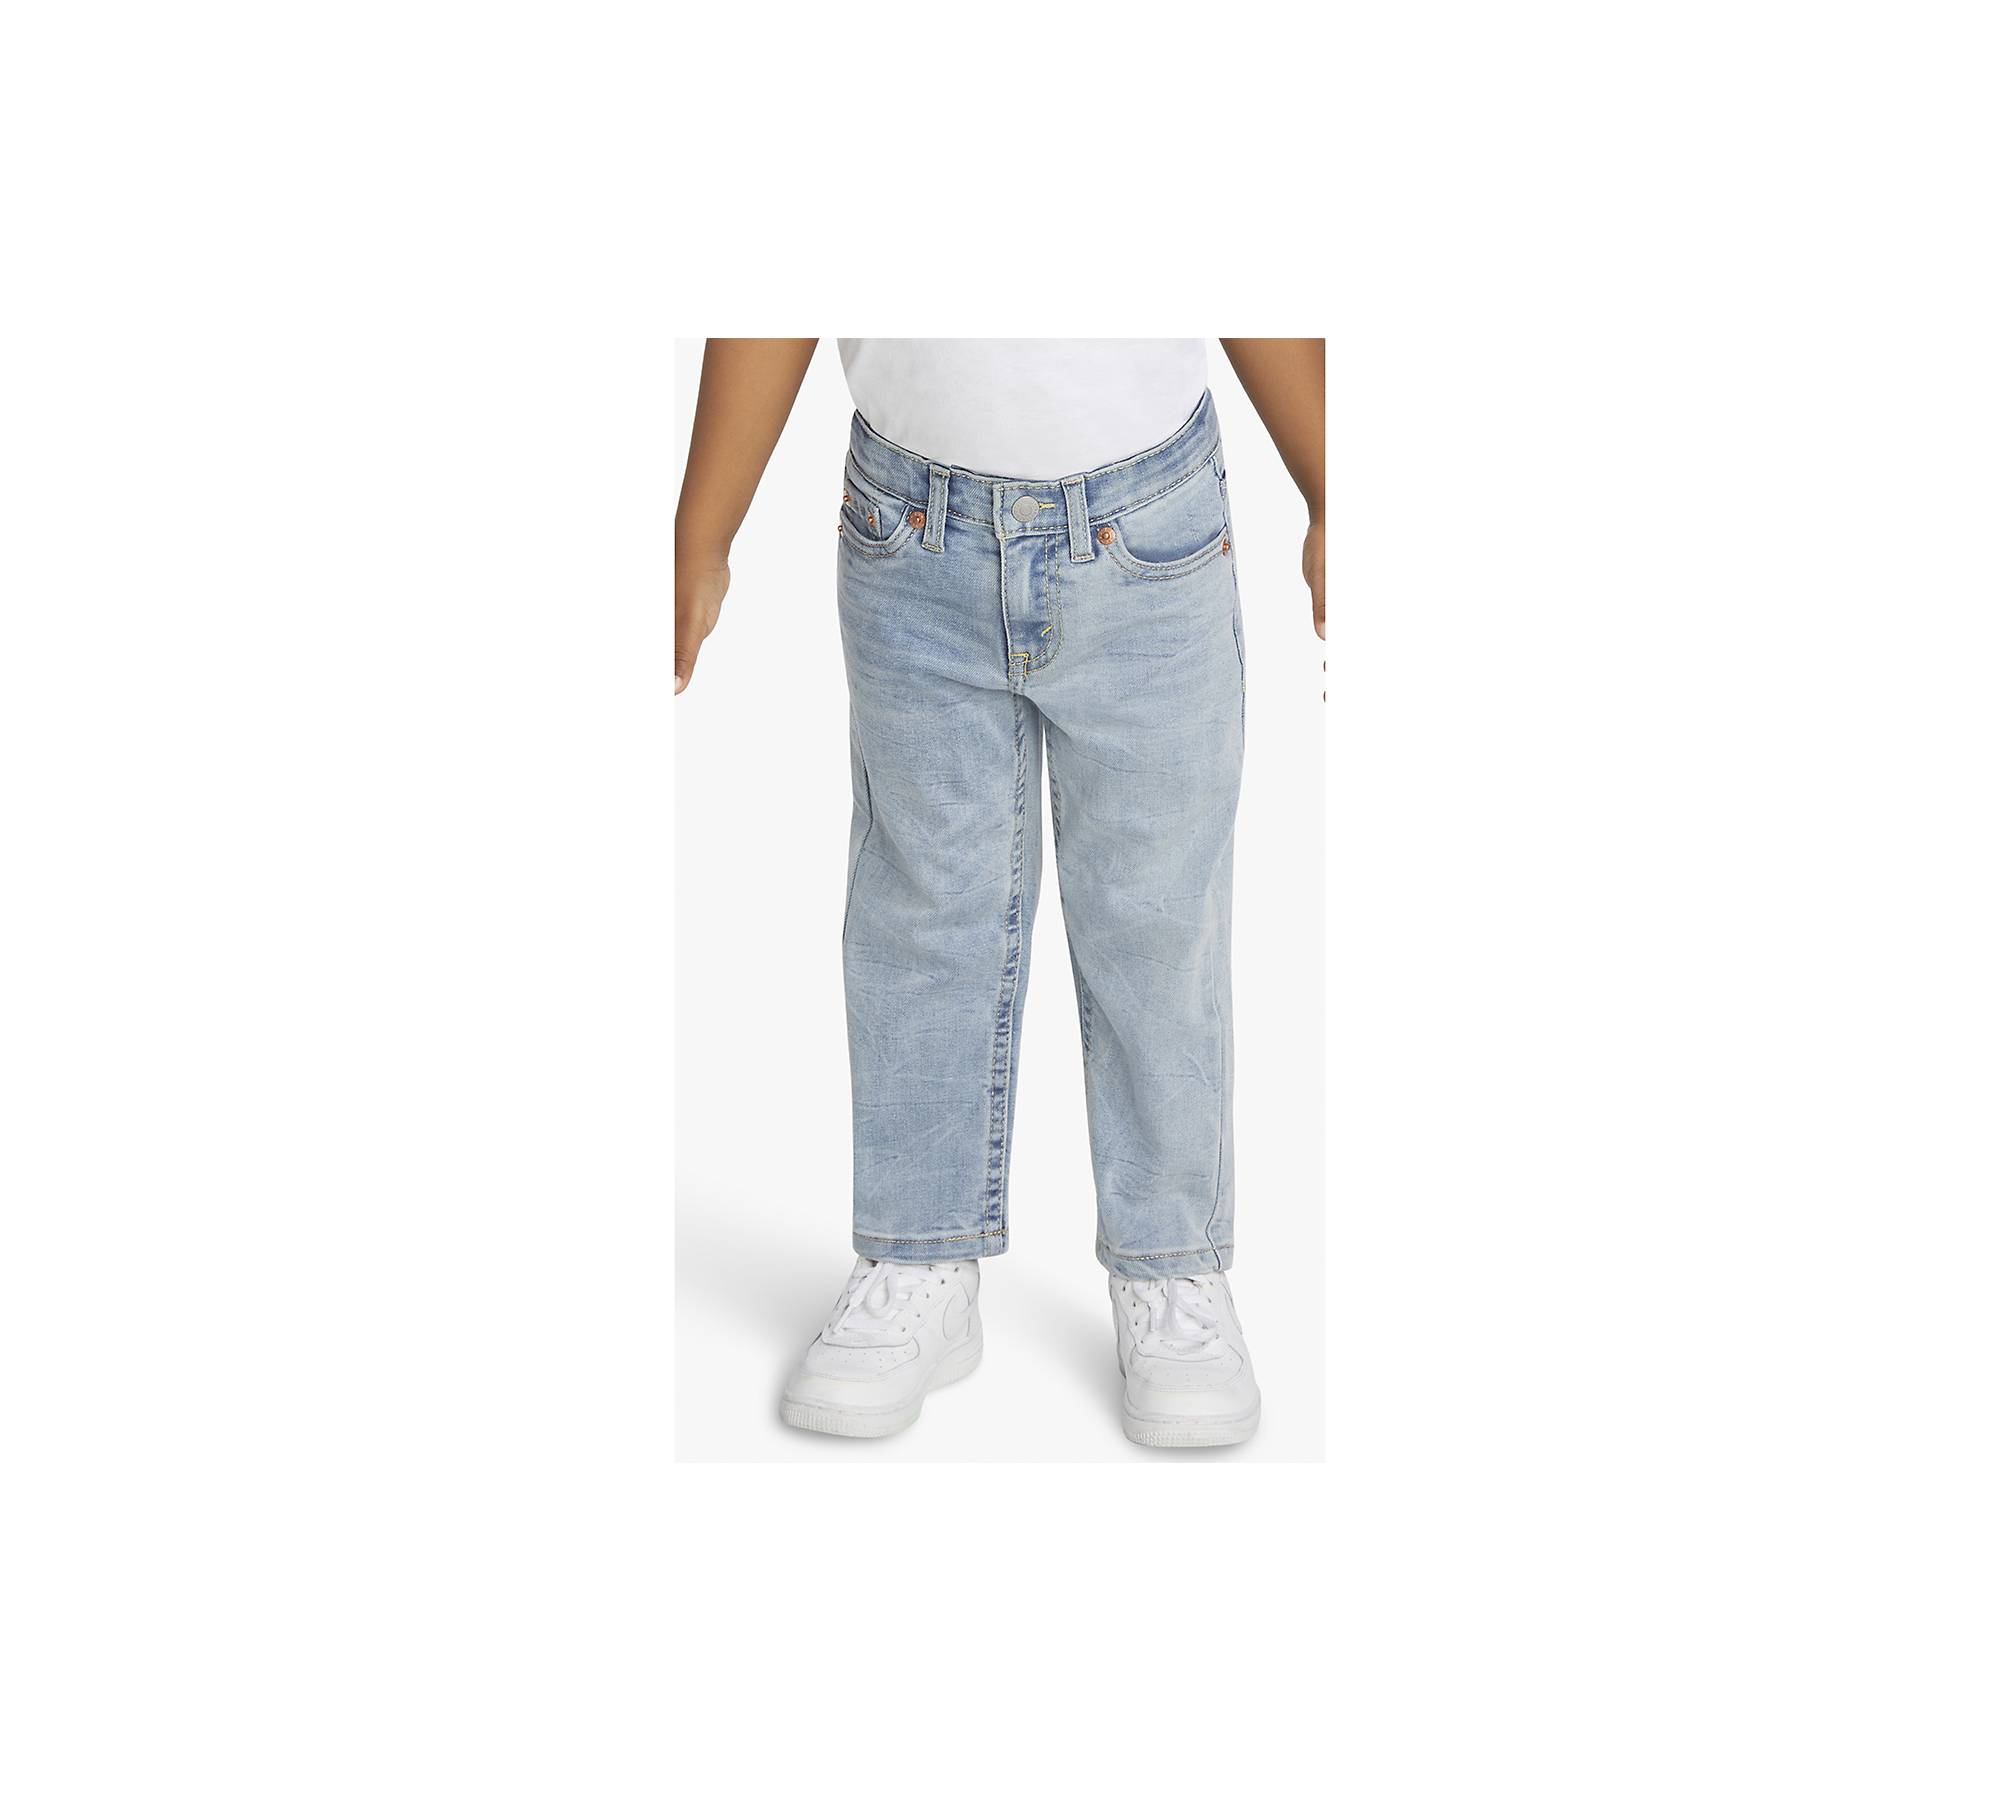 502™ Taper Fit Strong Performance Jeans Toddler Boys 2t-4t - Light Wash ...